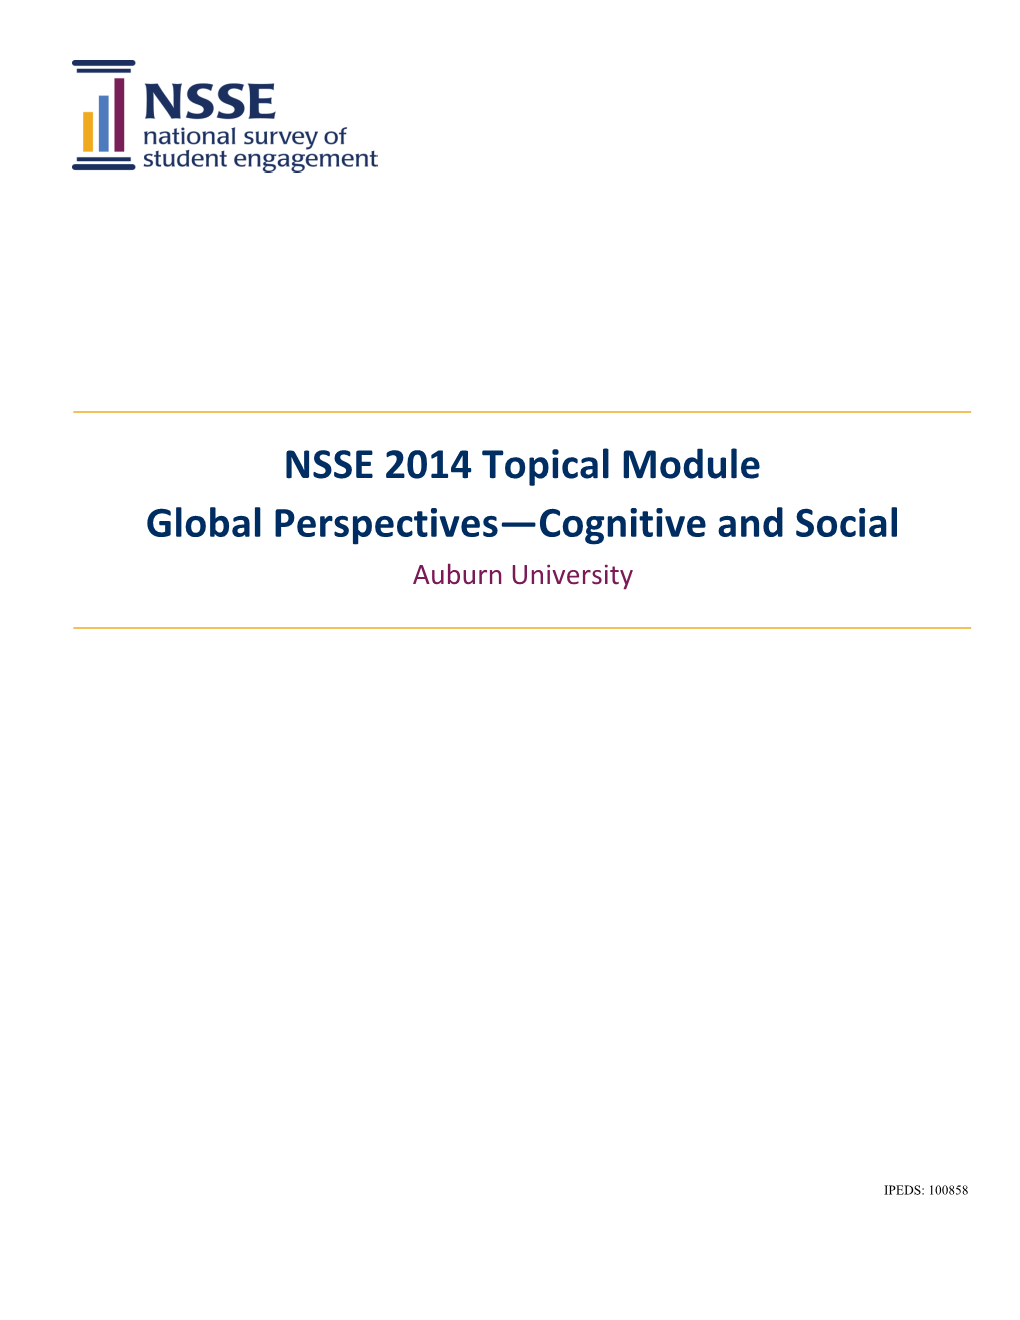 NSSE14 Topical Module